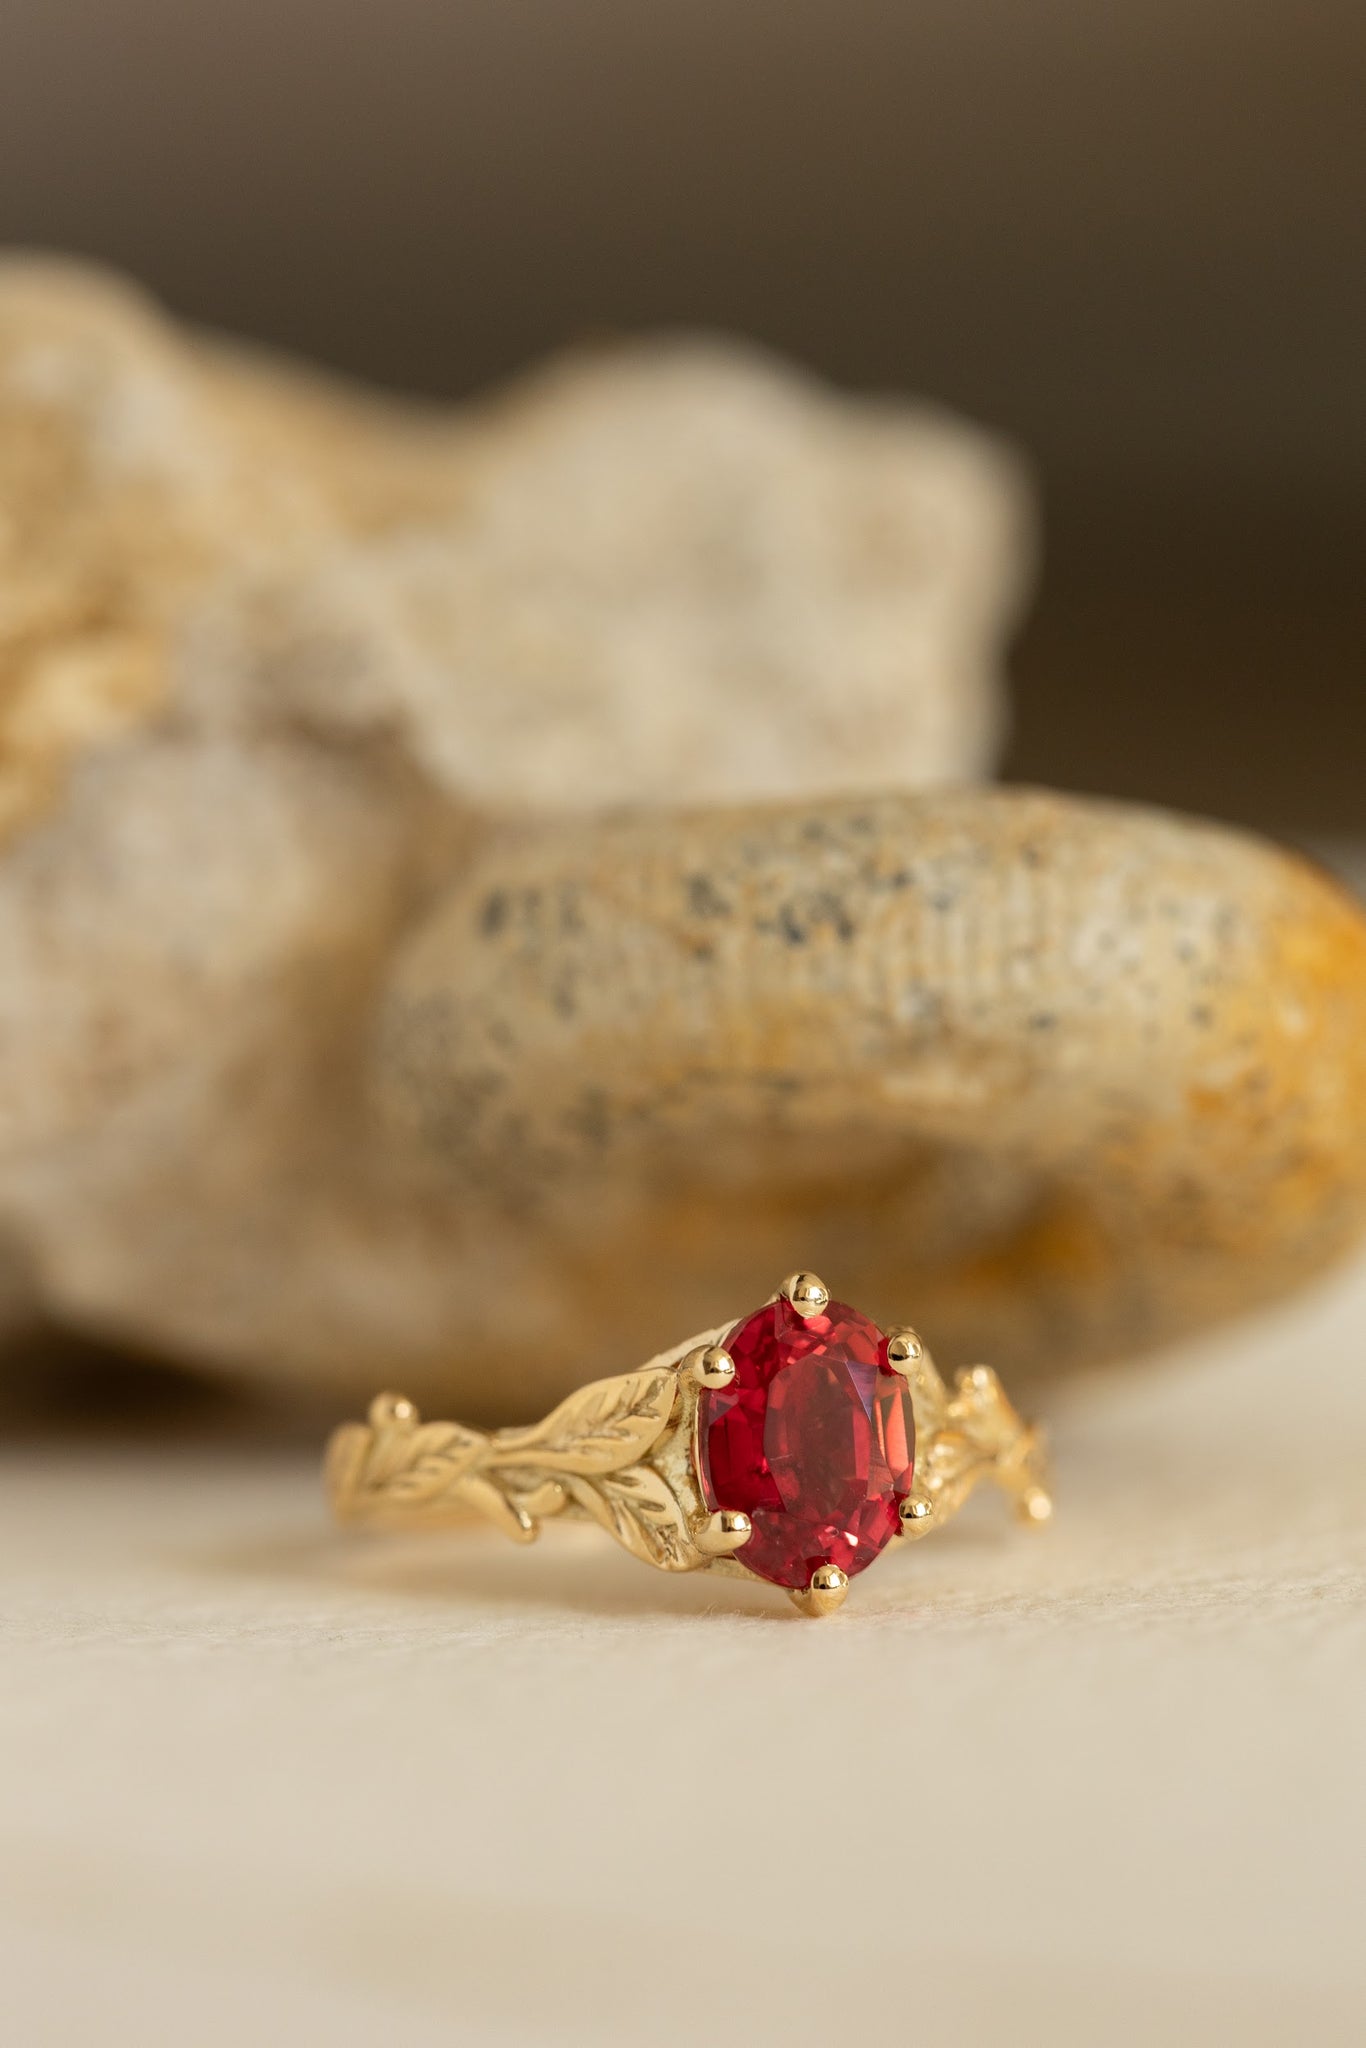 Freesia ring in 14K yellow gold, lab padparadscha sapphire,  8x6 mm oval cut - Eden Garden Jewelry™